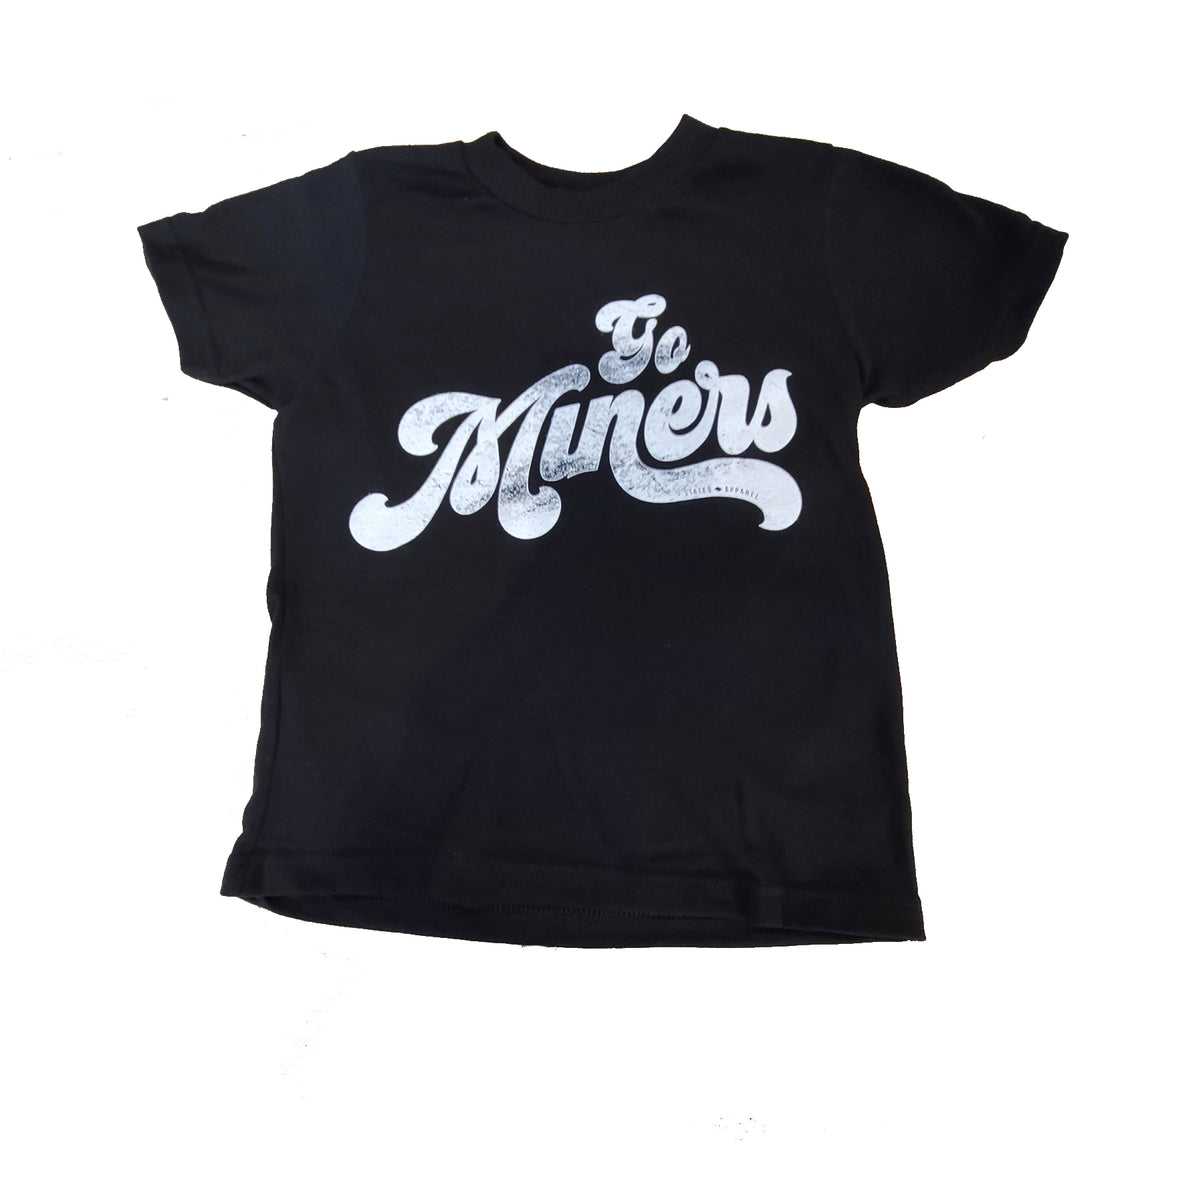 Go Miners YOUTH T-Shirt